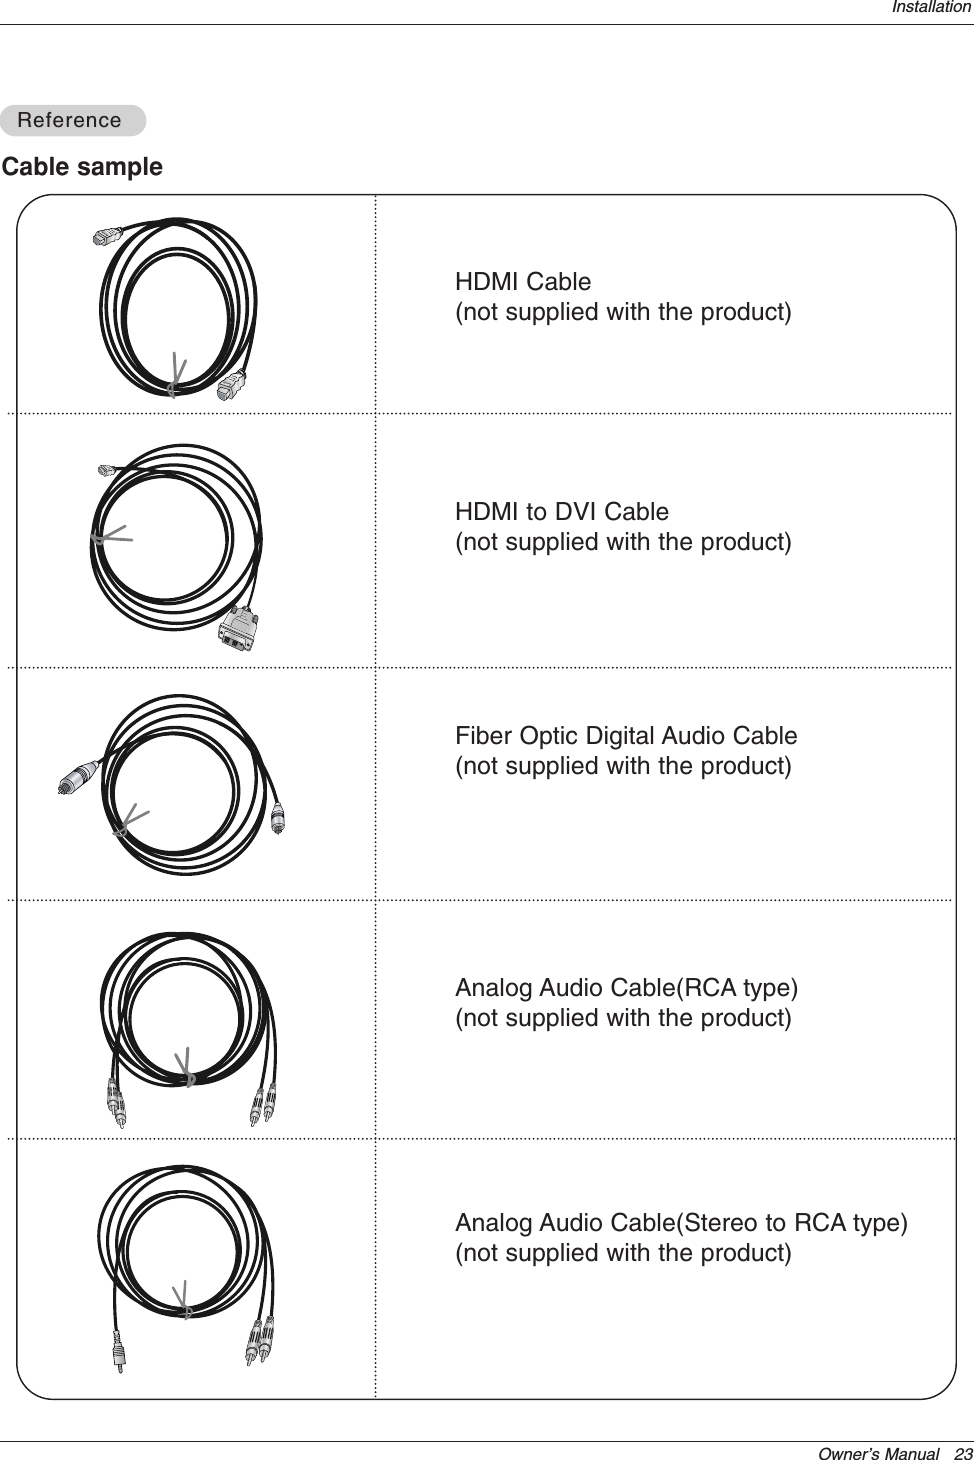 Owner’s Manual   23InstallationCable sampleHDMI Cable (not supplied with the product)HDMI to DVI Cable (not supplied with the product)Fiber Optic Digital Audio Cable(not supplied with the product)Analog Audio Cable(RCA type)(not supplied with the product)Analog Audio Cable(Stereo to RCA type)(not supplied with the product)ReferenceReference